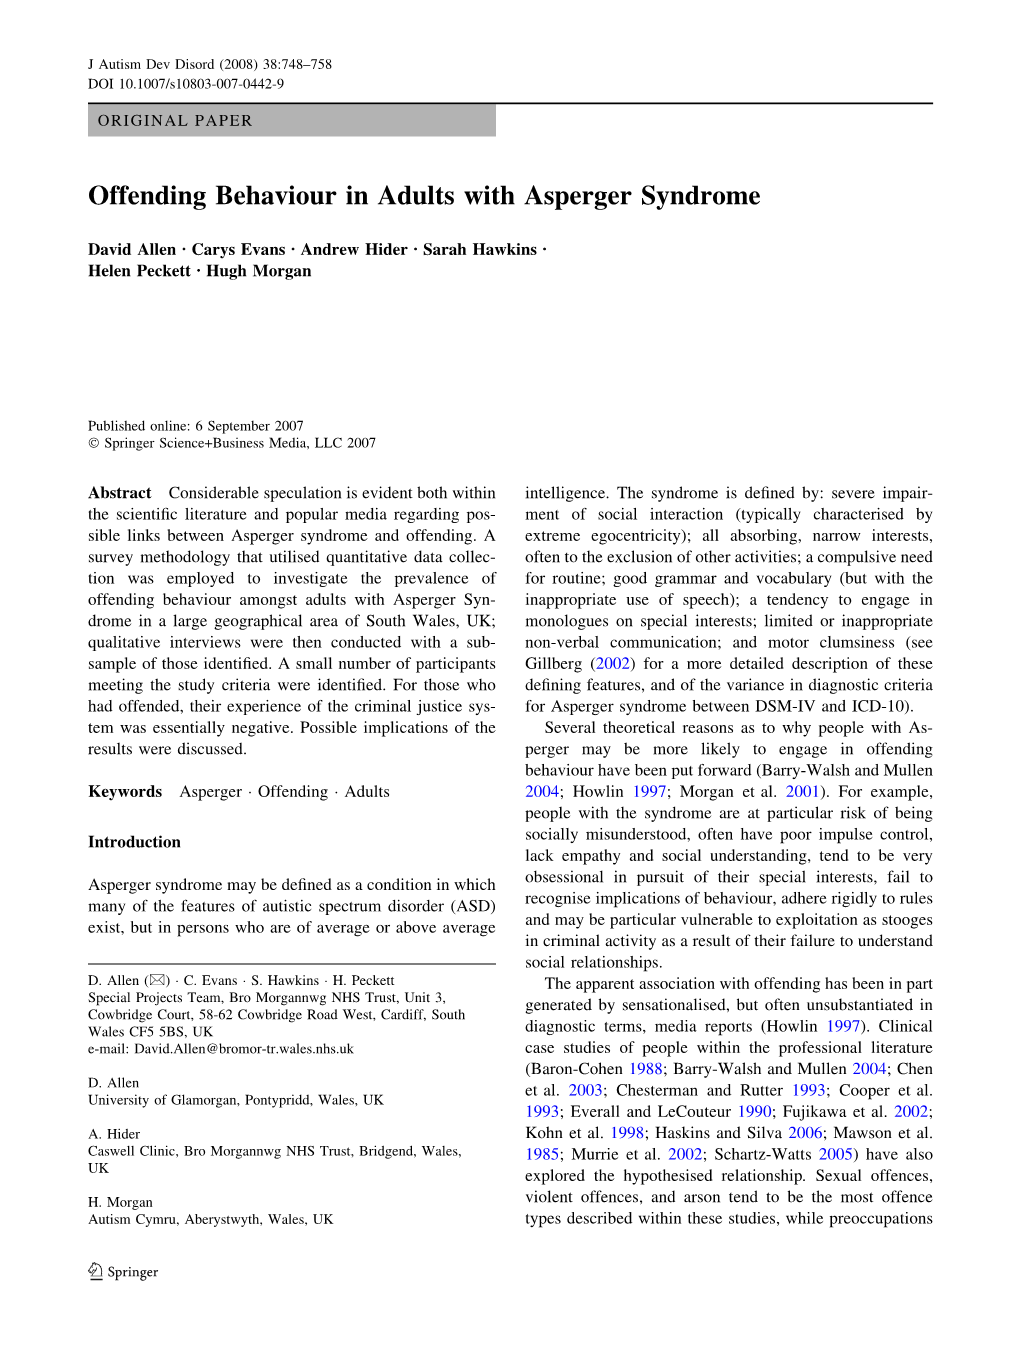 Offending Behaviour in Adults with Asperger Syndrome